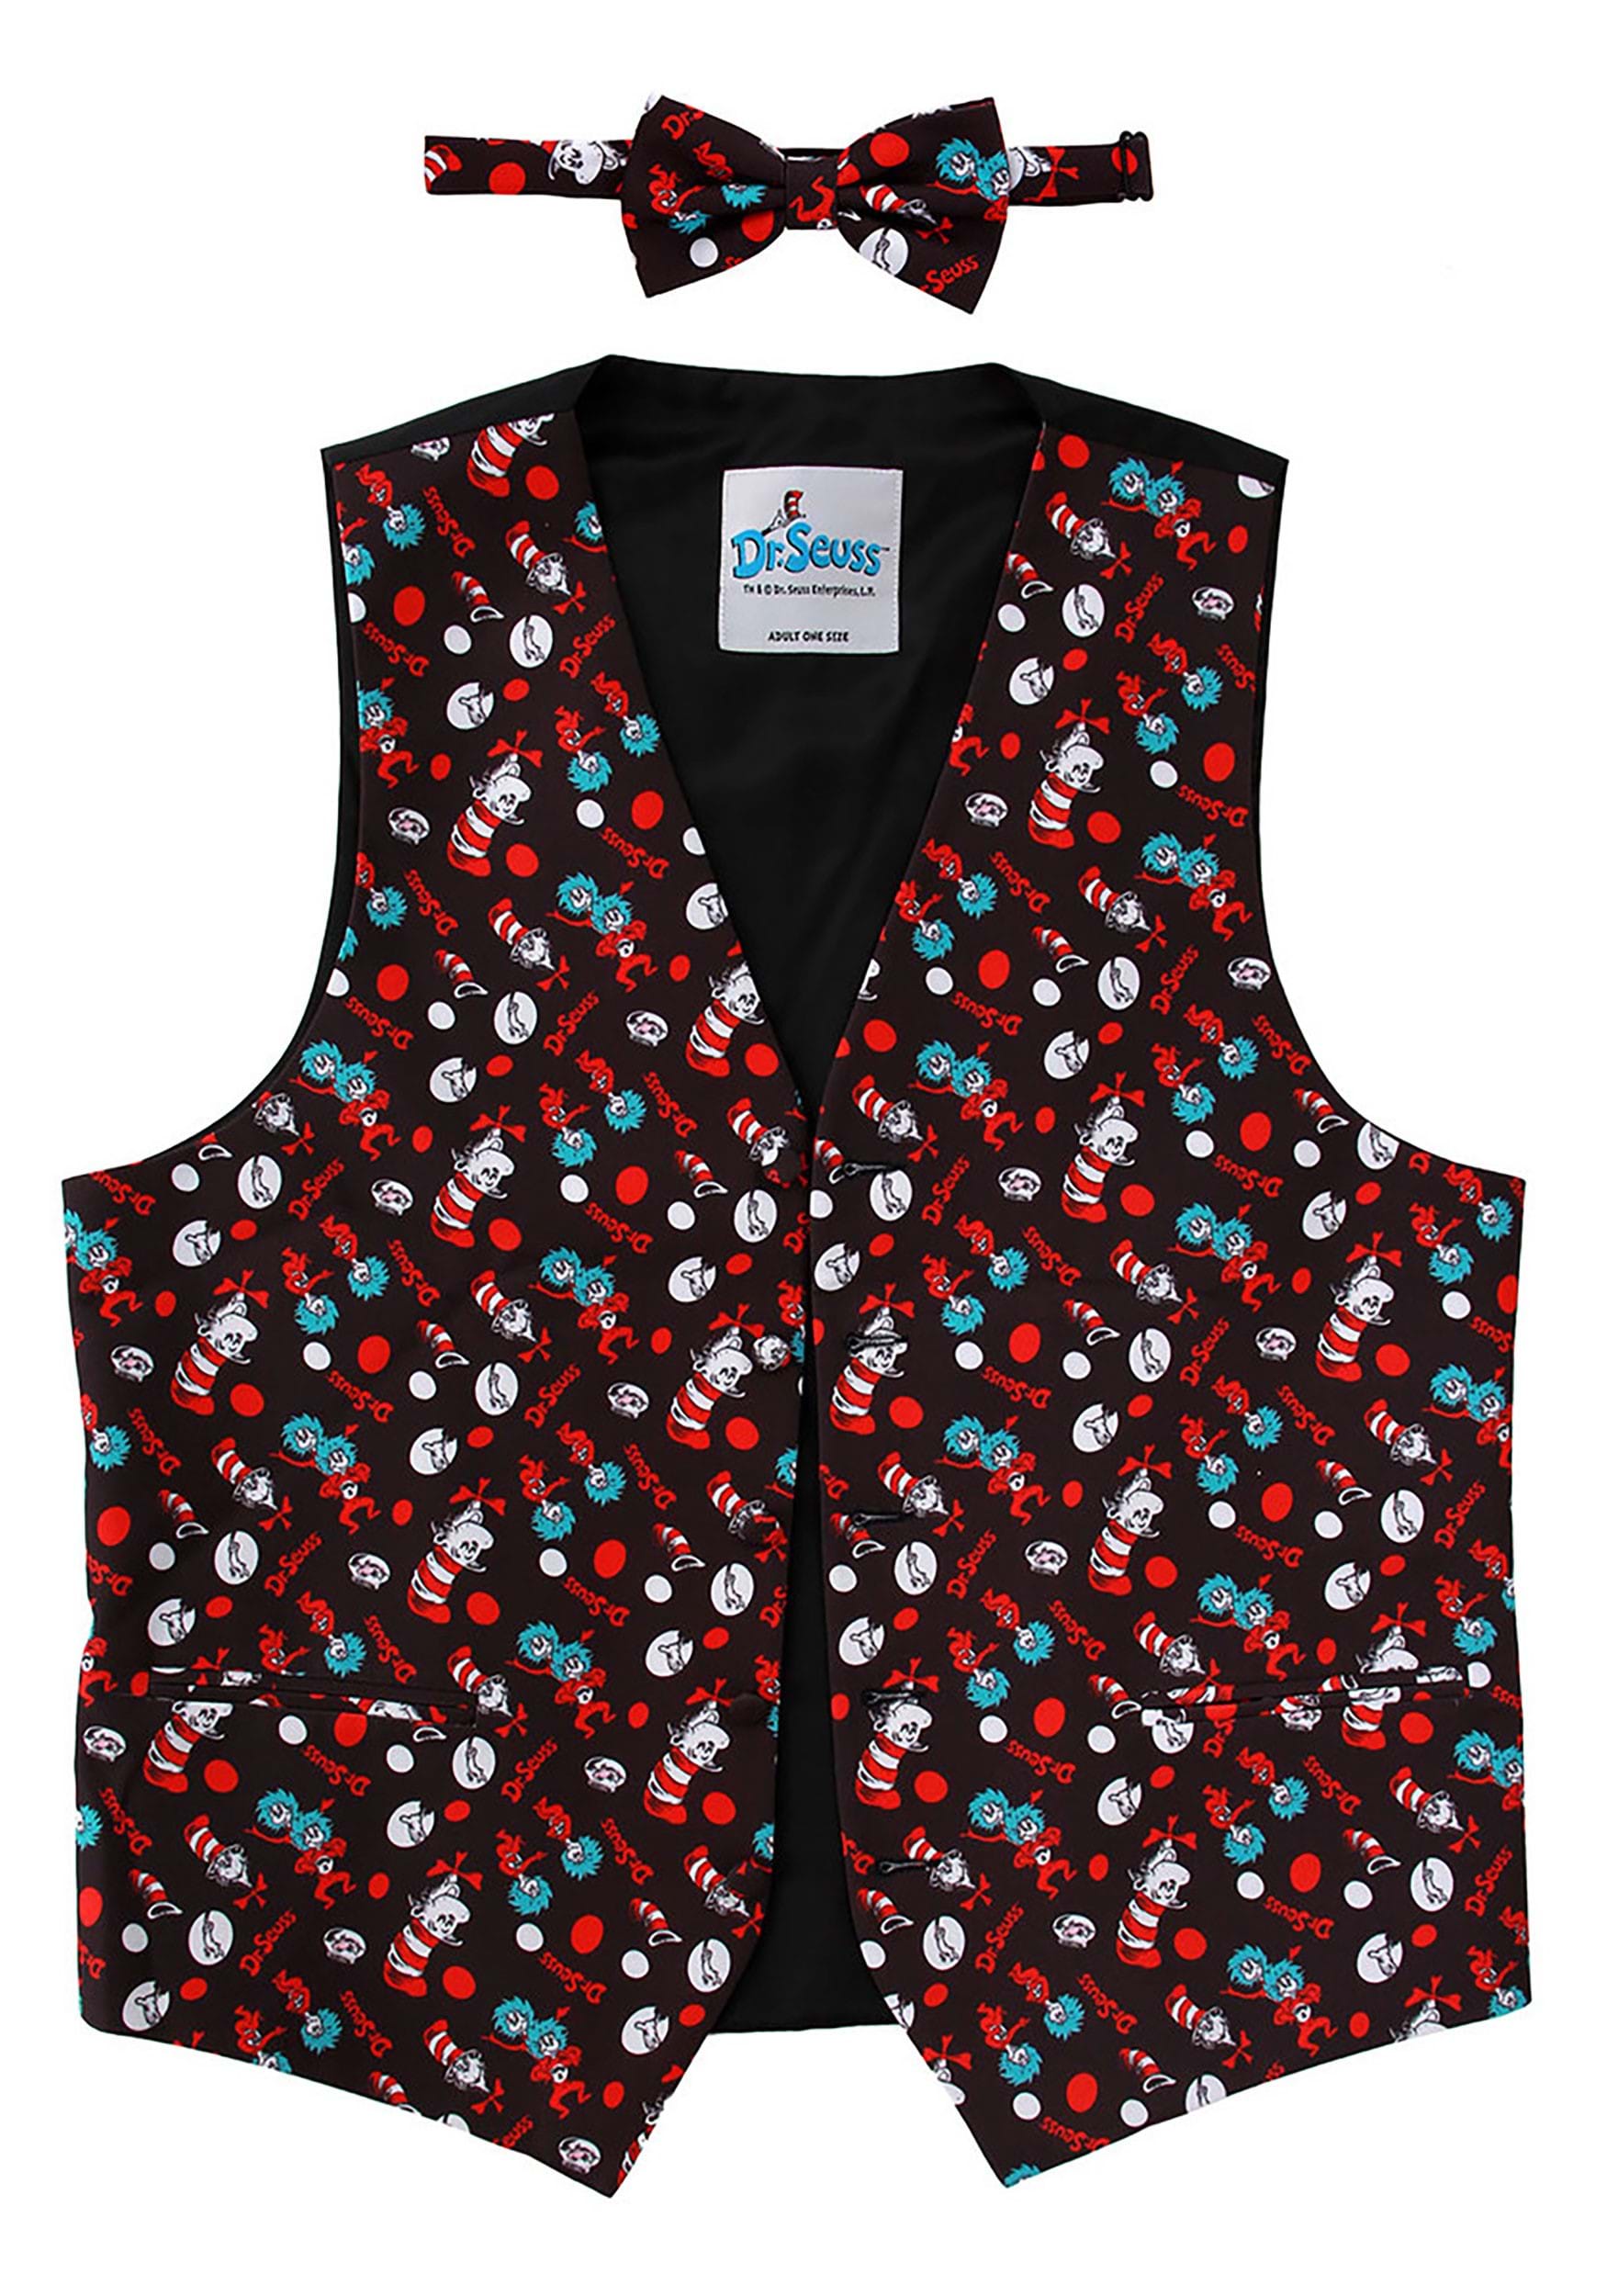 The Cat In The Hat Pattern Bow Tie & Vest Kit